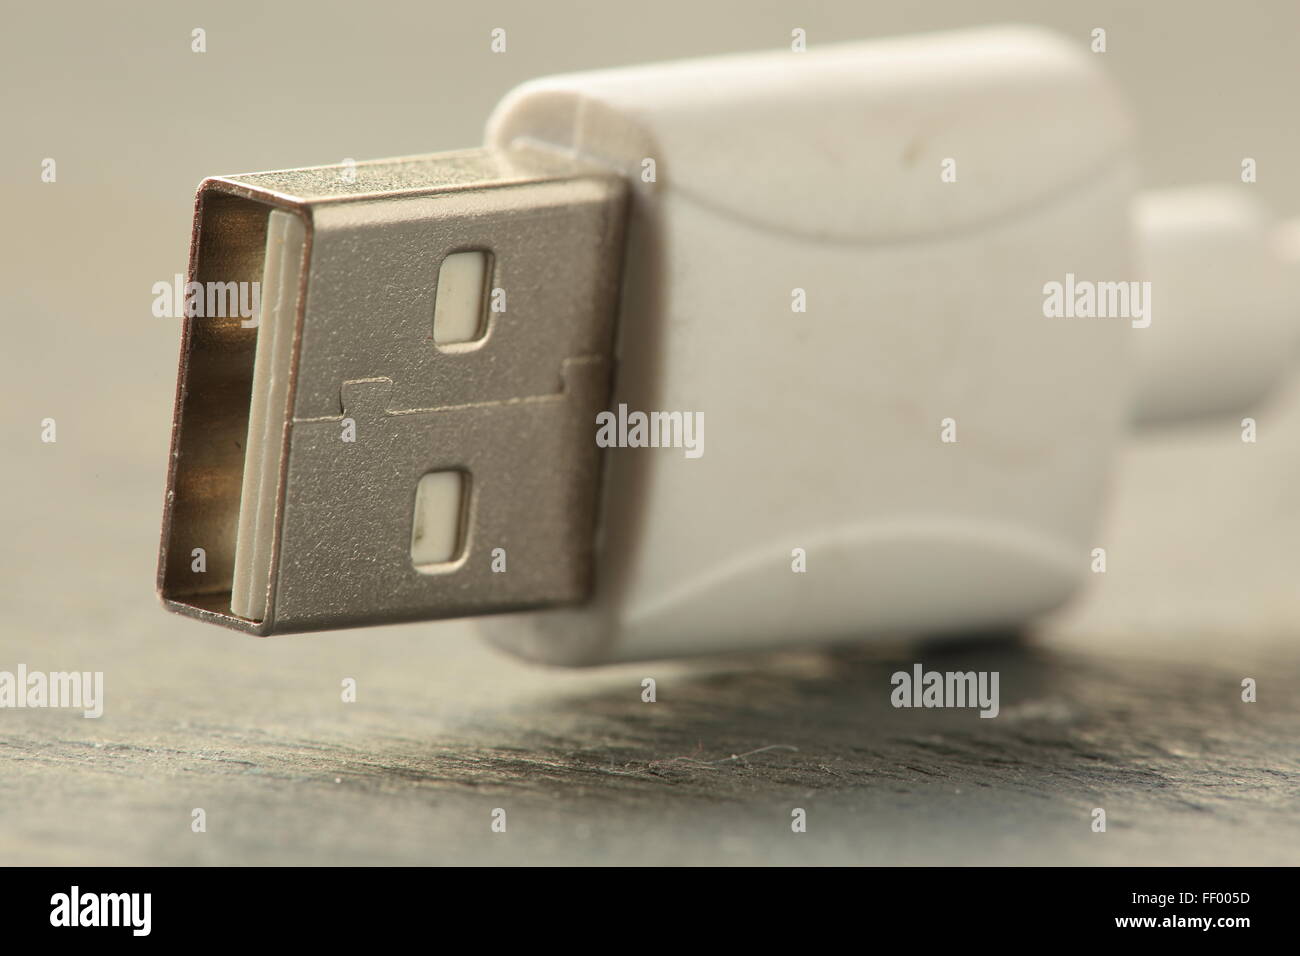 USB cable charger Stock Photo